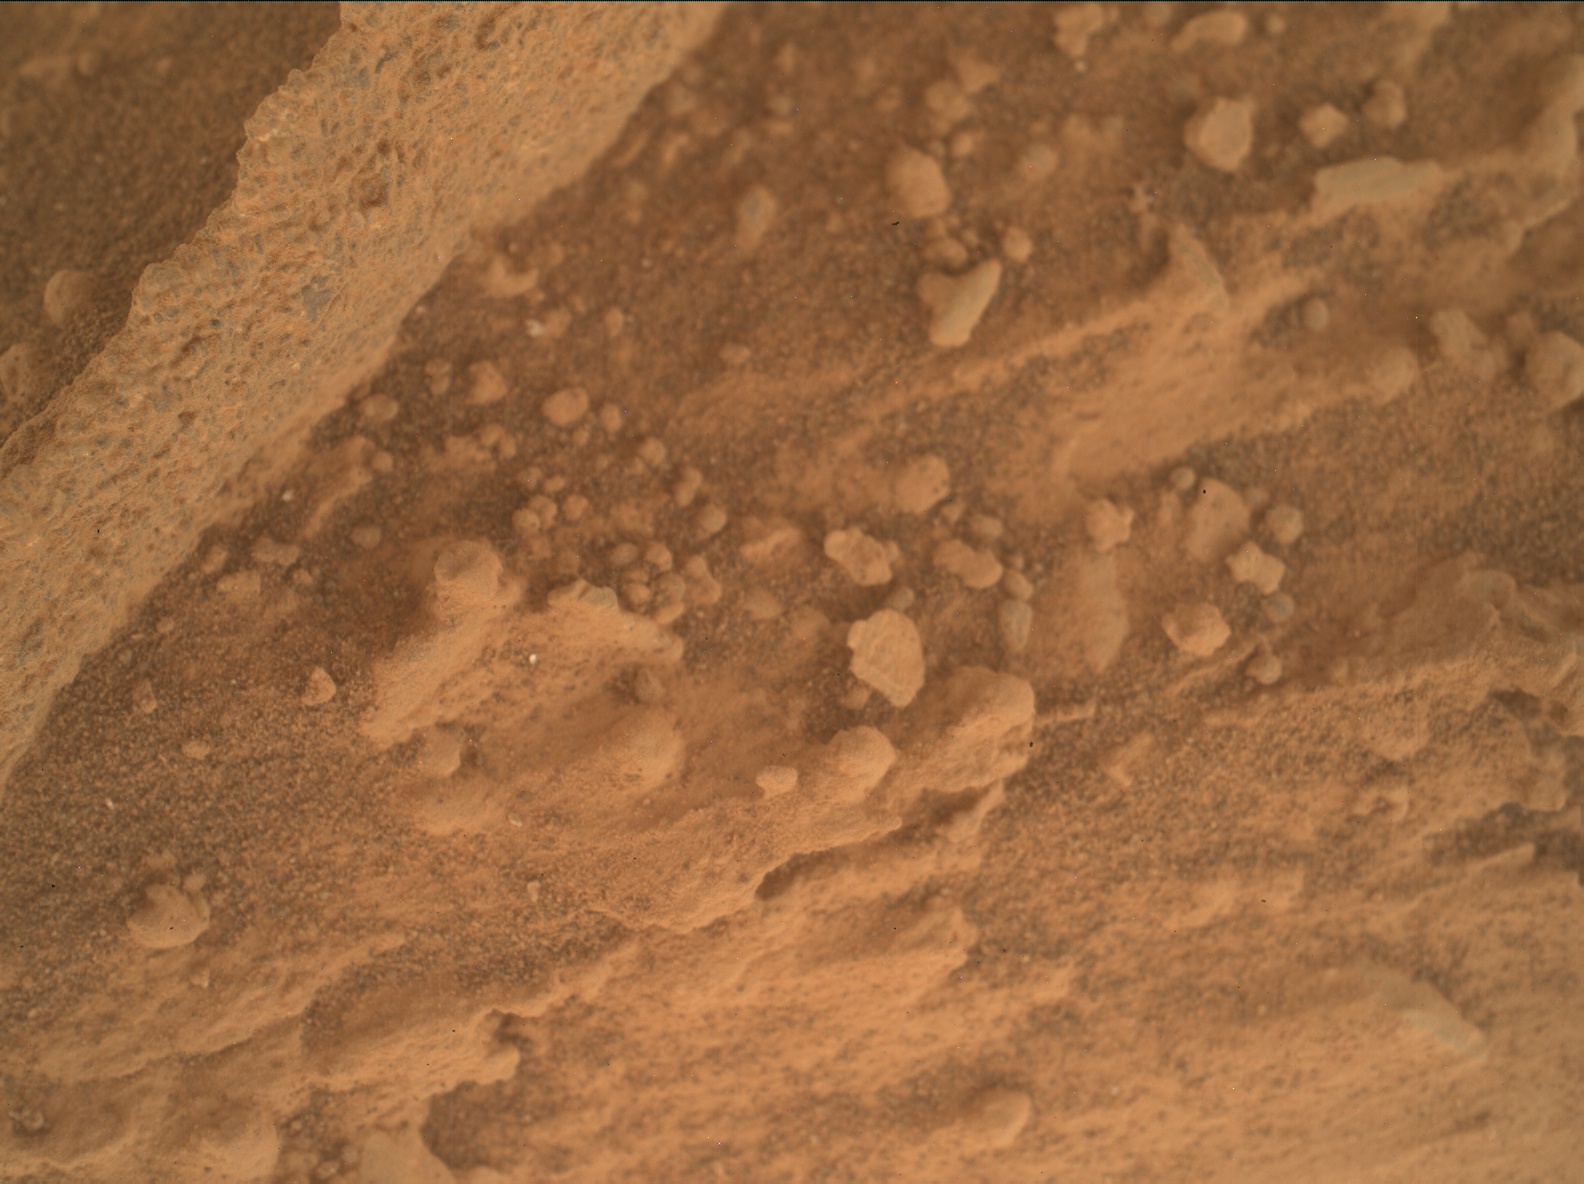 Nasa's Mars rover Curiosity acquired this image using its Mars Hand Lens Imager (MAHLI) on Sol 3530